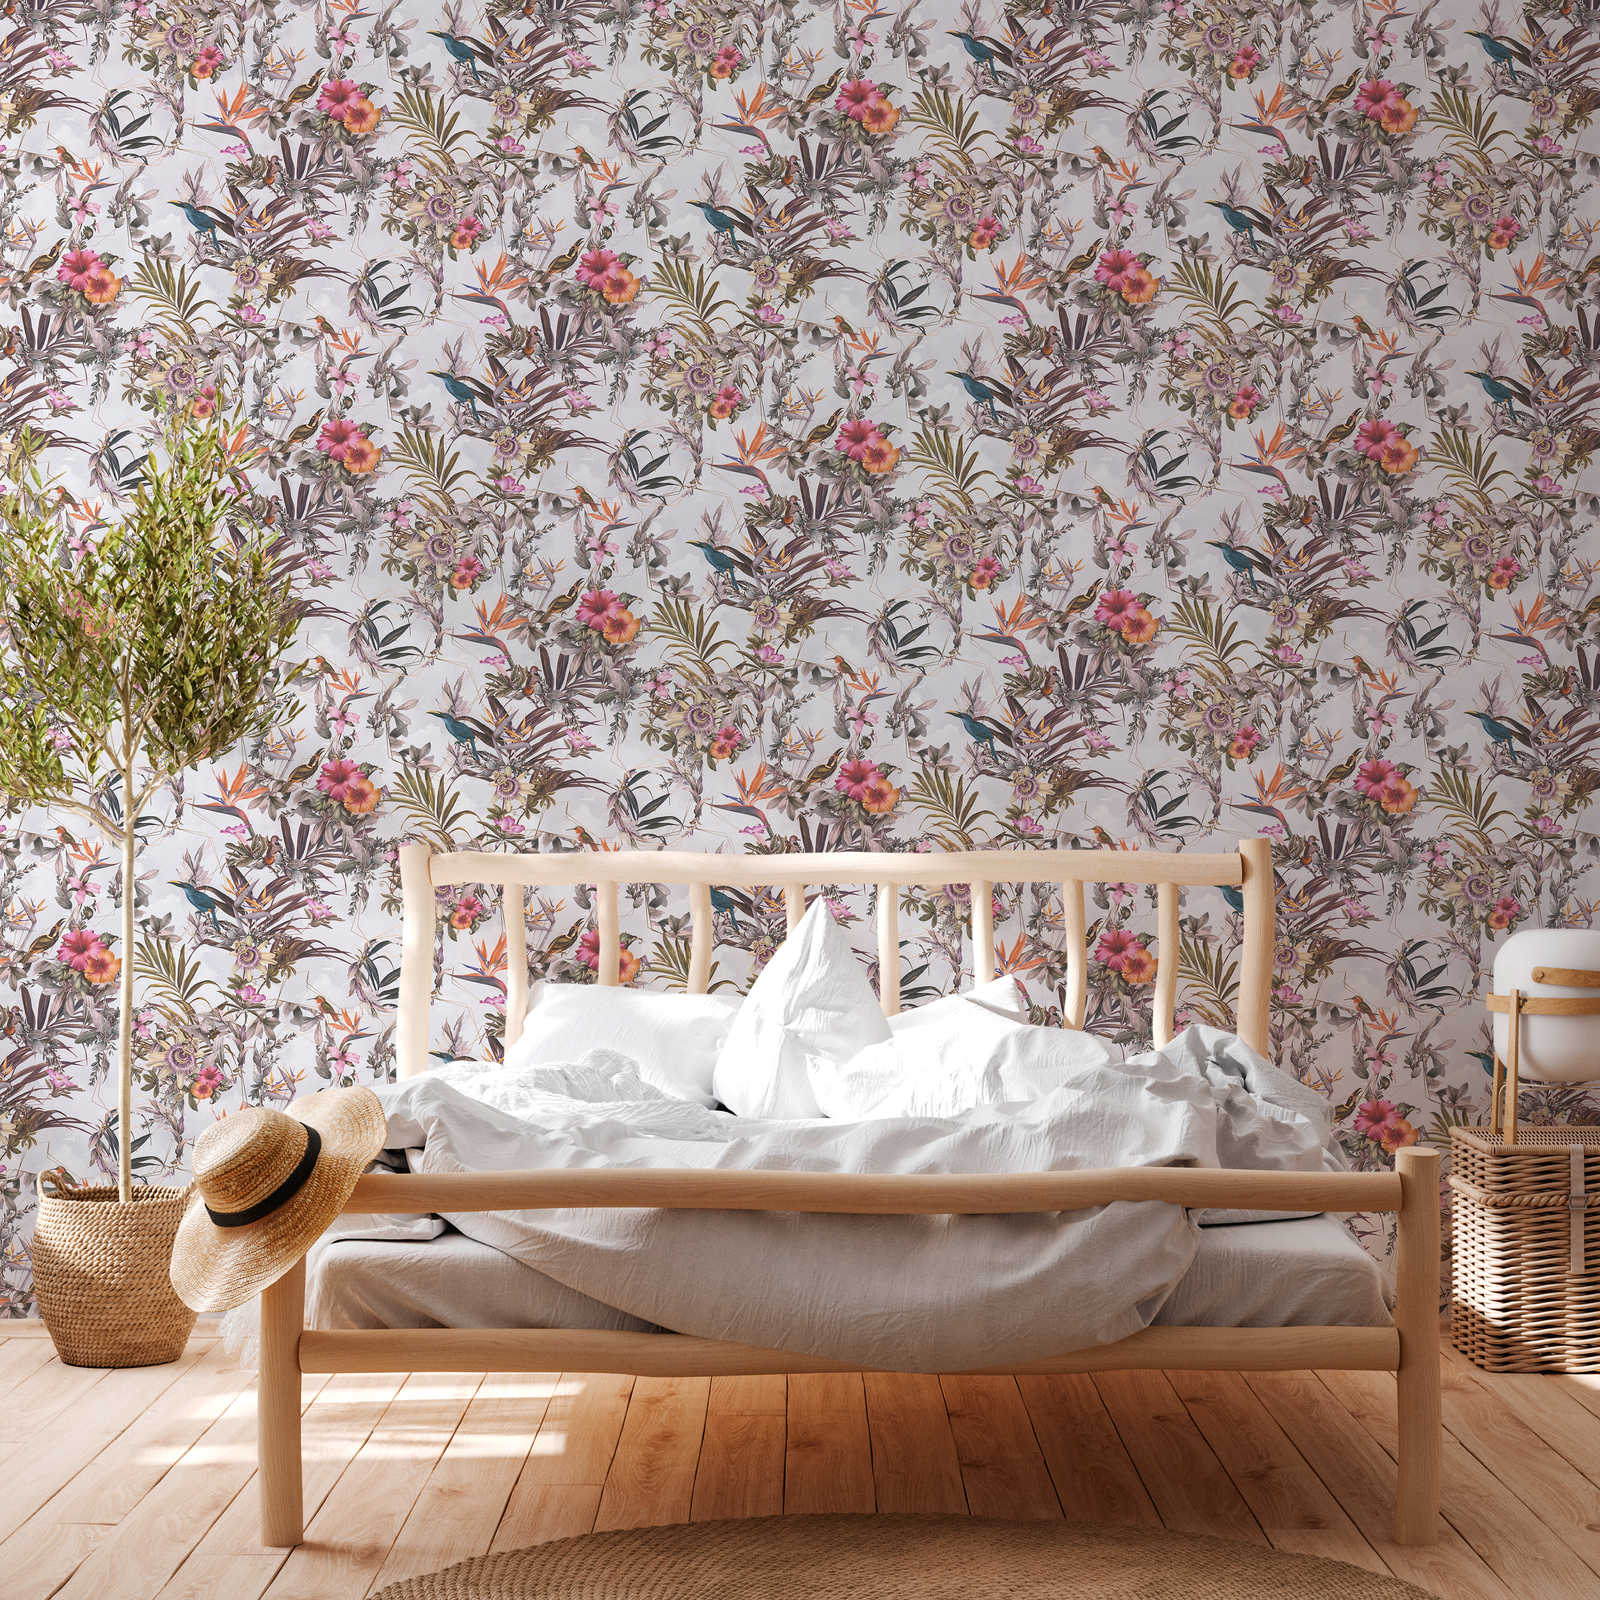             Watercolour style tropical flowers wallpaper - grey, green
        